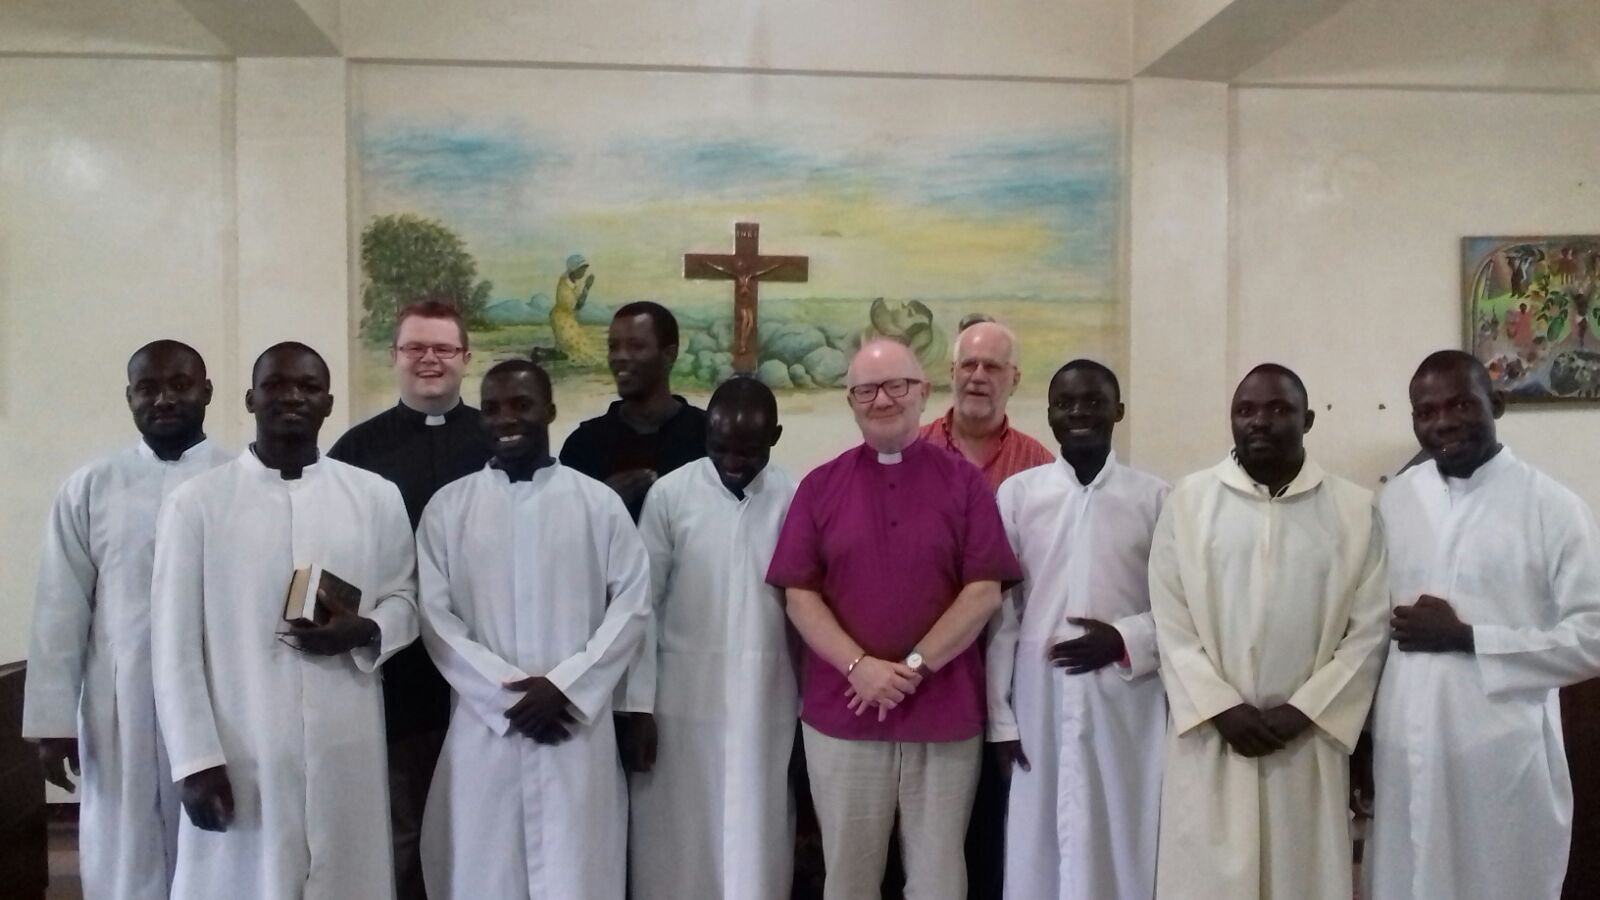 Archbishop Clarke, the Revd Adrian Dorrian and Dr Keith Scott with the third year students at St John's Anglican Seminary in Kitwe. Photo (c) CMS Ireland